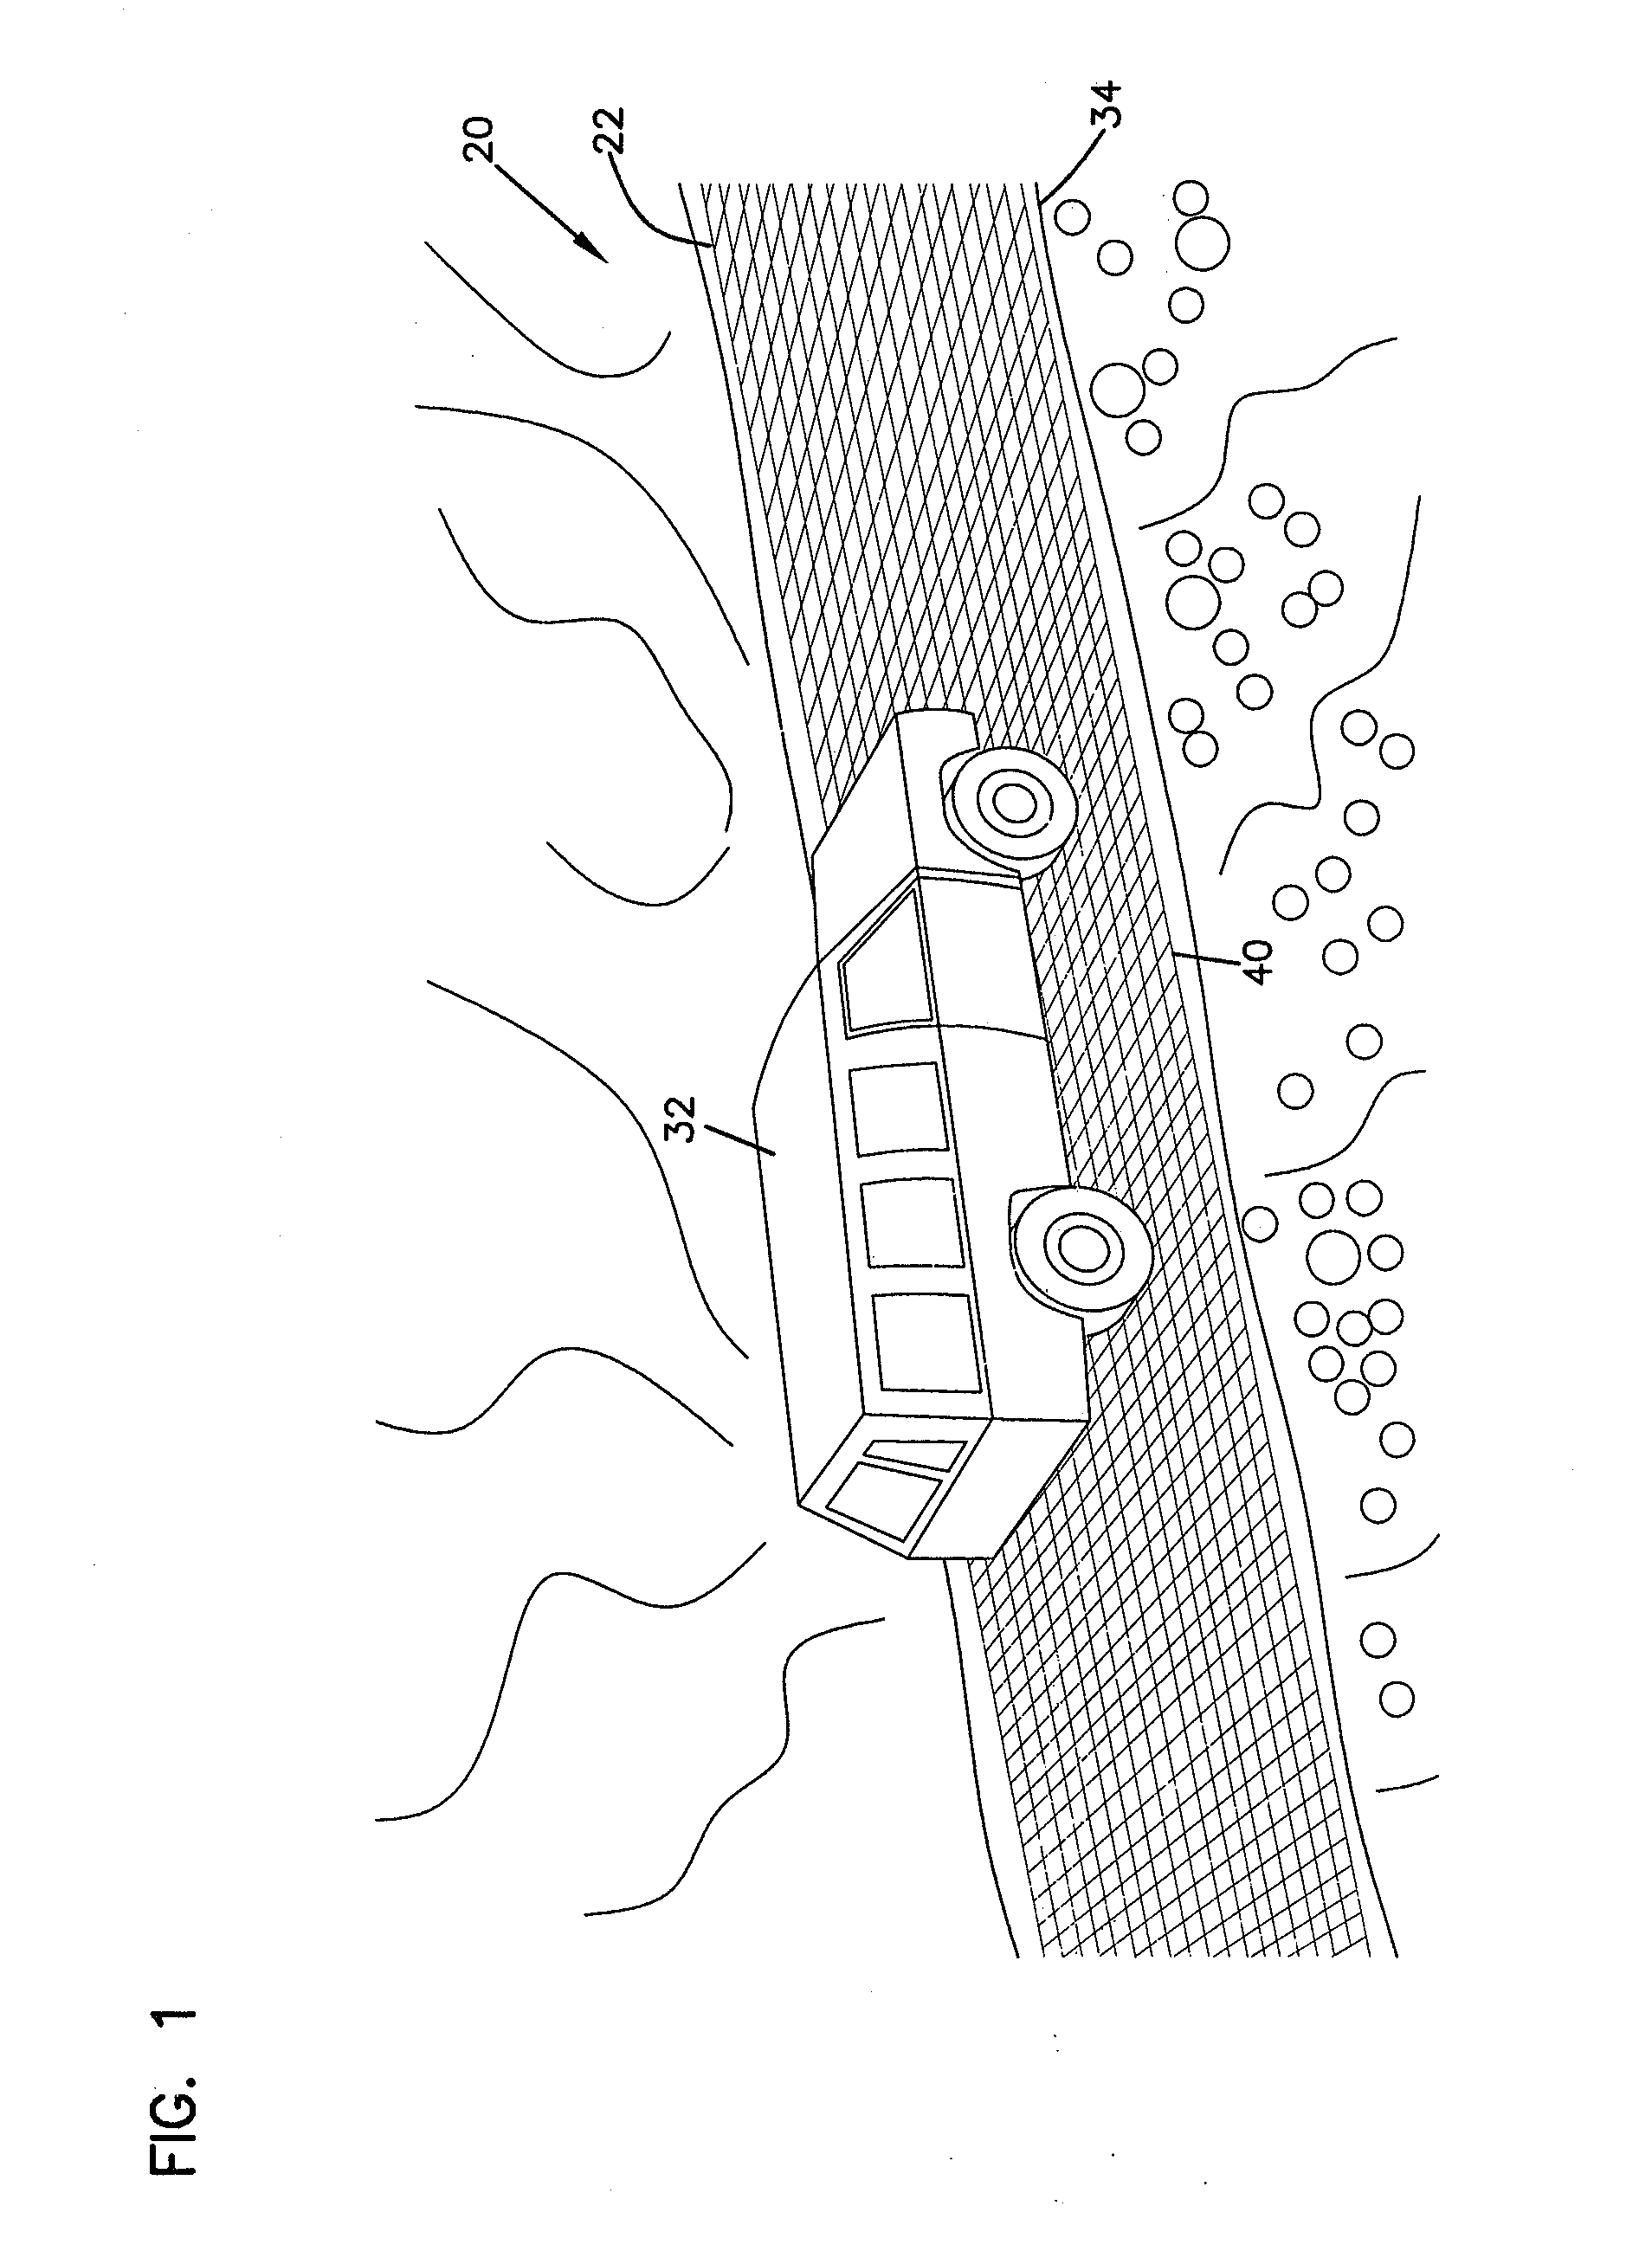 Portable porous pavement system and methods